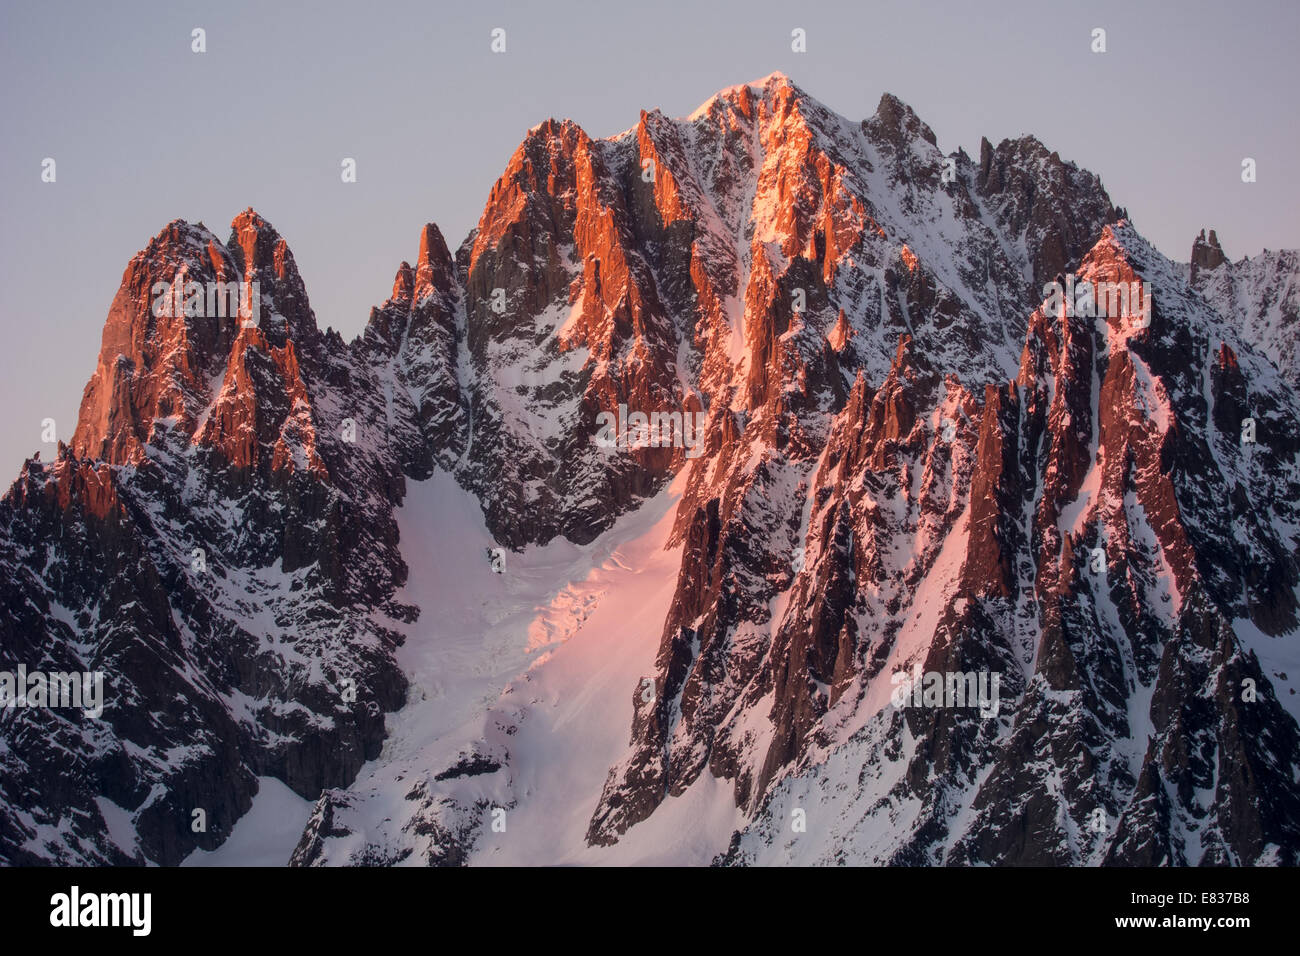 Les Drus and Aiguille Verte at dusk as seen from Requin hut, Vallee Blanche, Chamonix, France Stock Photo